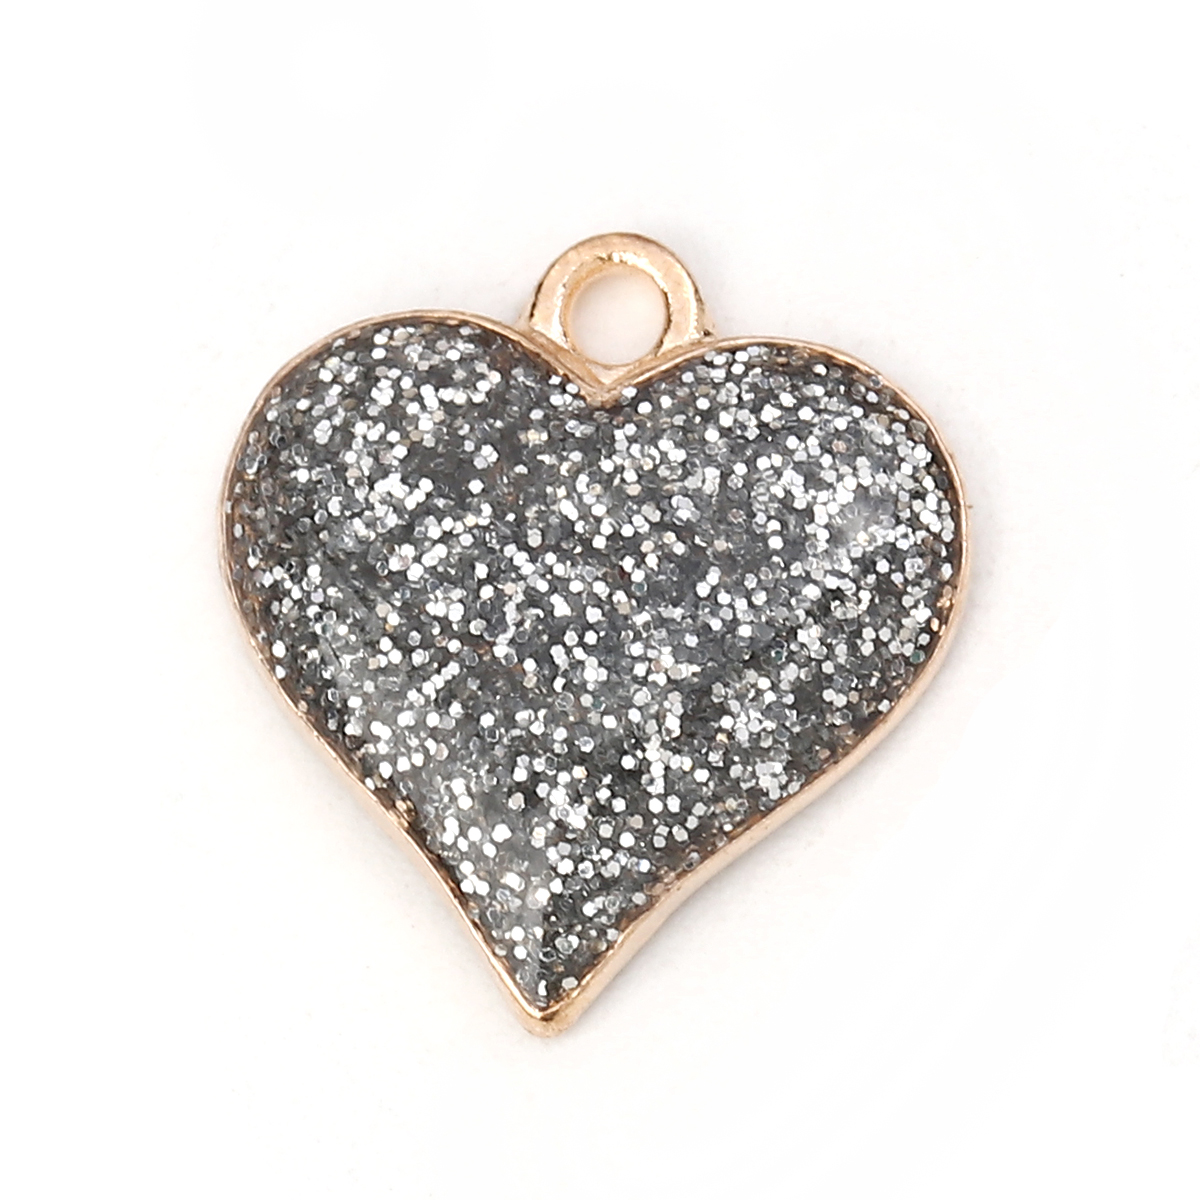 Picture of Zinc Based Alloy Charms Heart Gold Plated Silver Glitter 17mm( 5/8") x 16mm( 5/8"), 10 PCs